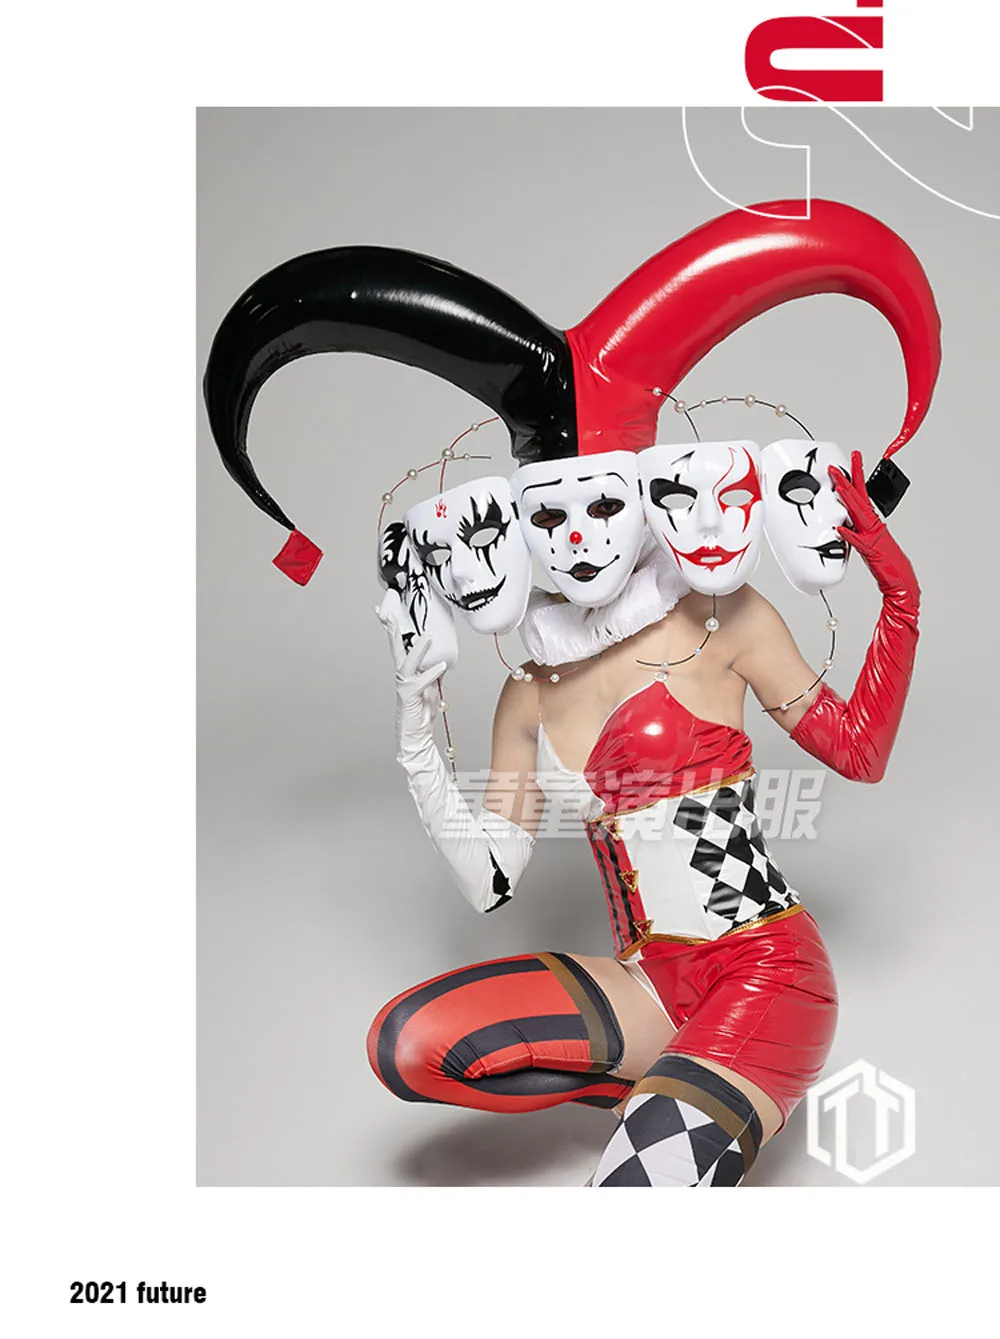 

Sexy women nightclub Dance wear Multi-faceted clown gogo costume female contrast suit ds outfit